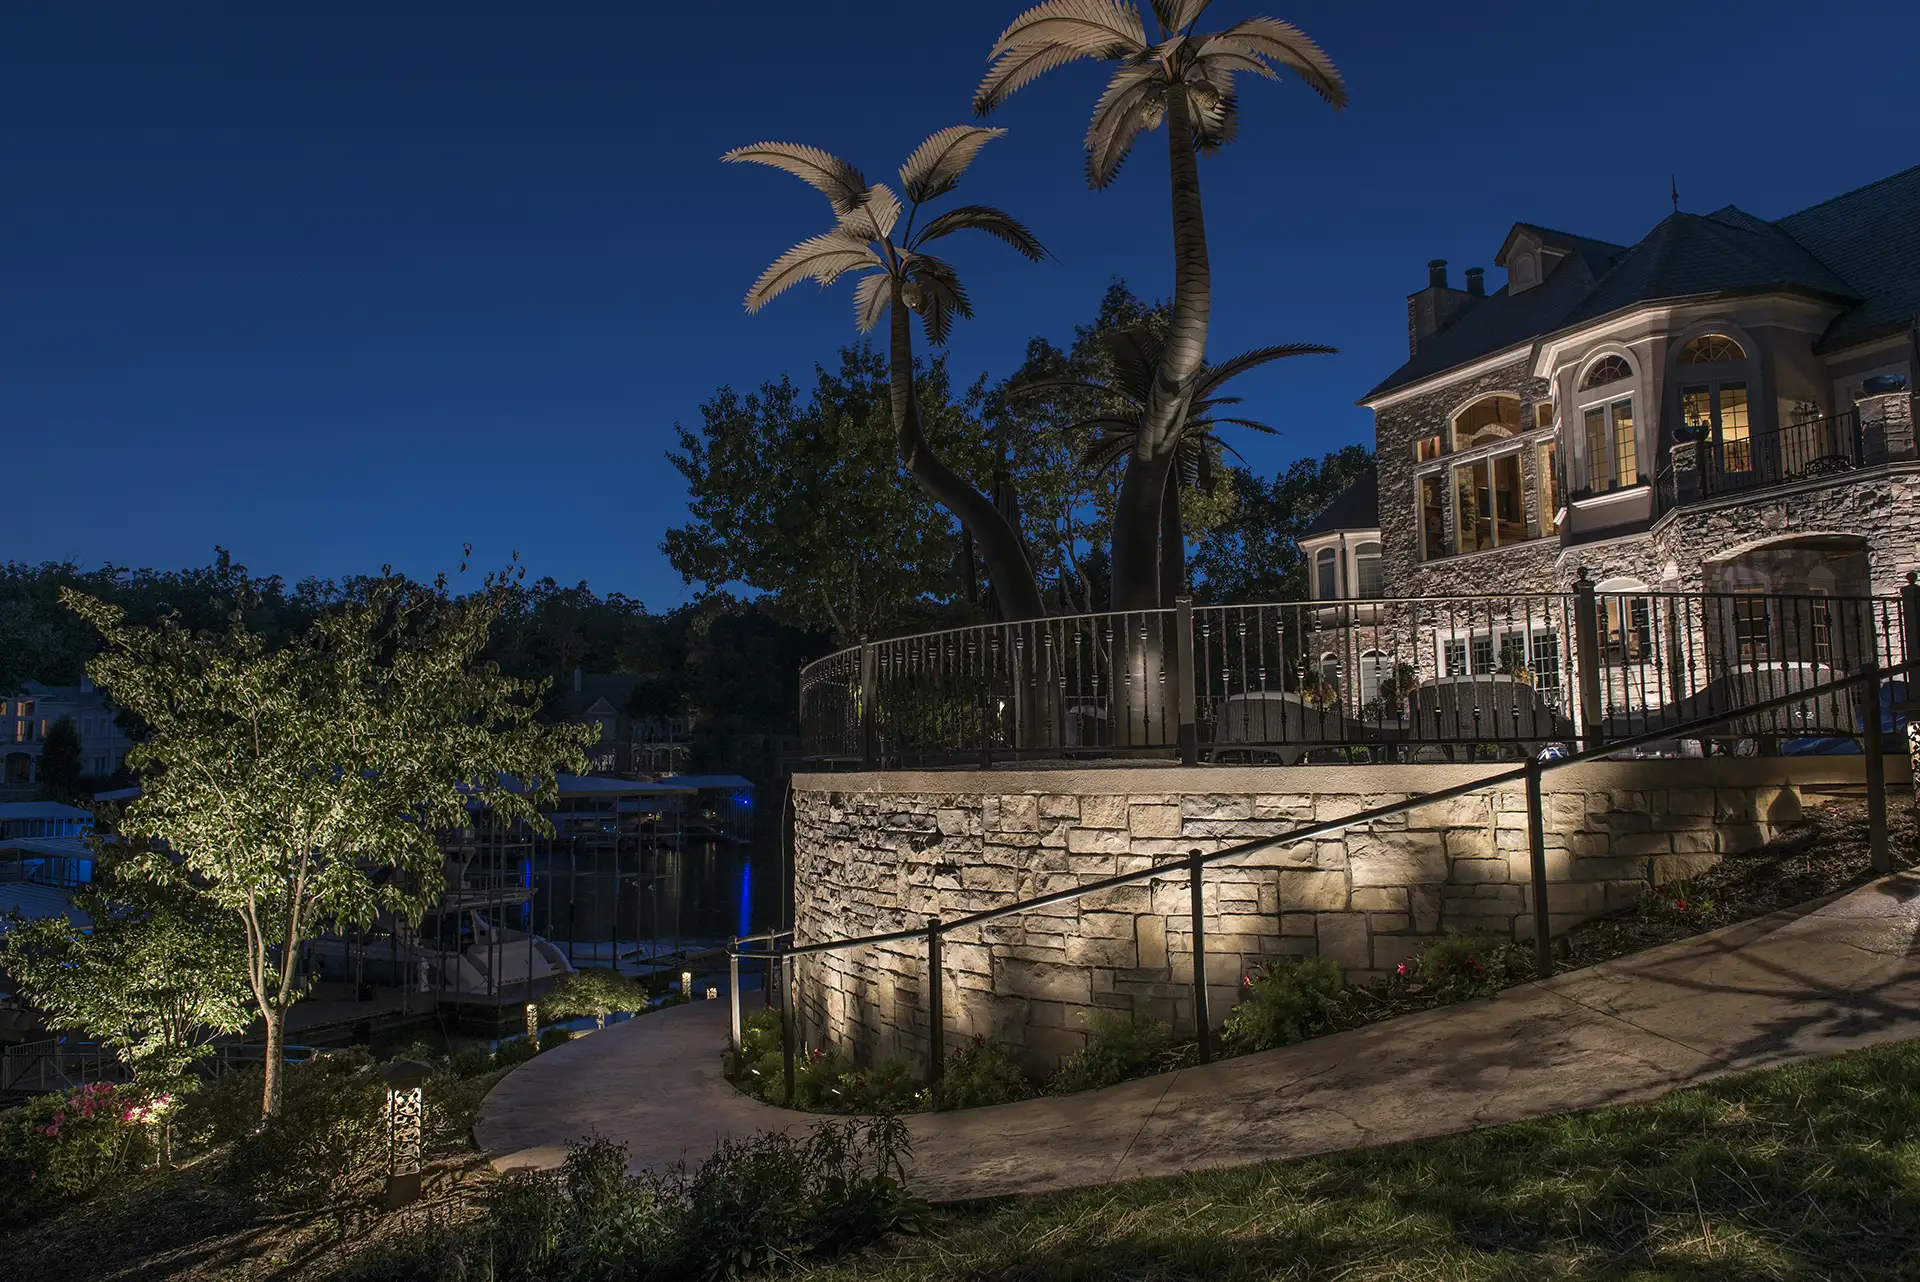 Ozarks lake house image 16 back yard path and palm trees Lighthouse Outdoor Lighting and Audio Central MO Missouri